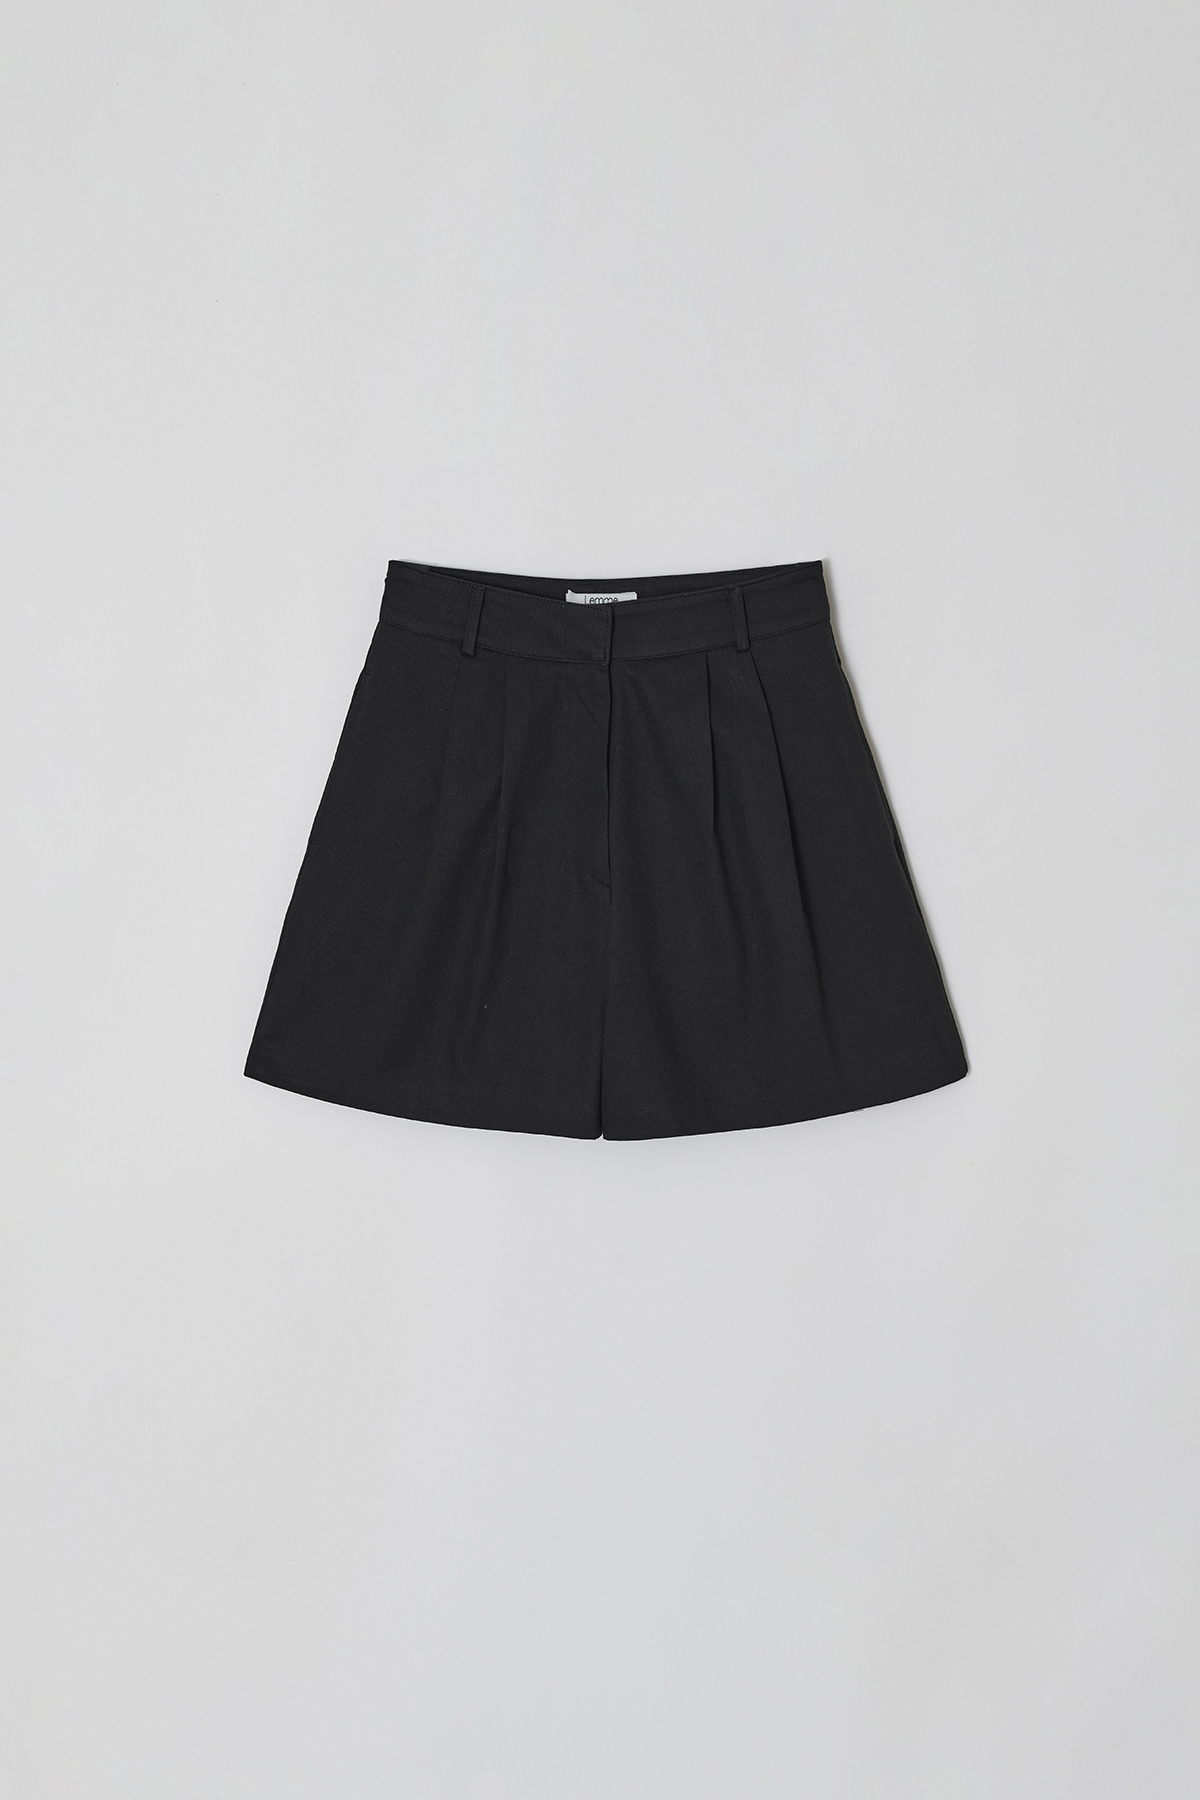 [NEW] TWO TUCK COTTON SHORTS, BLACK